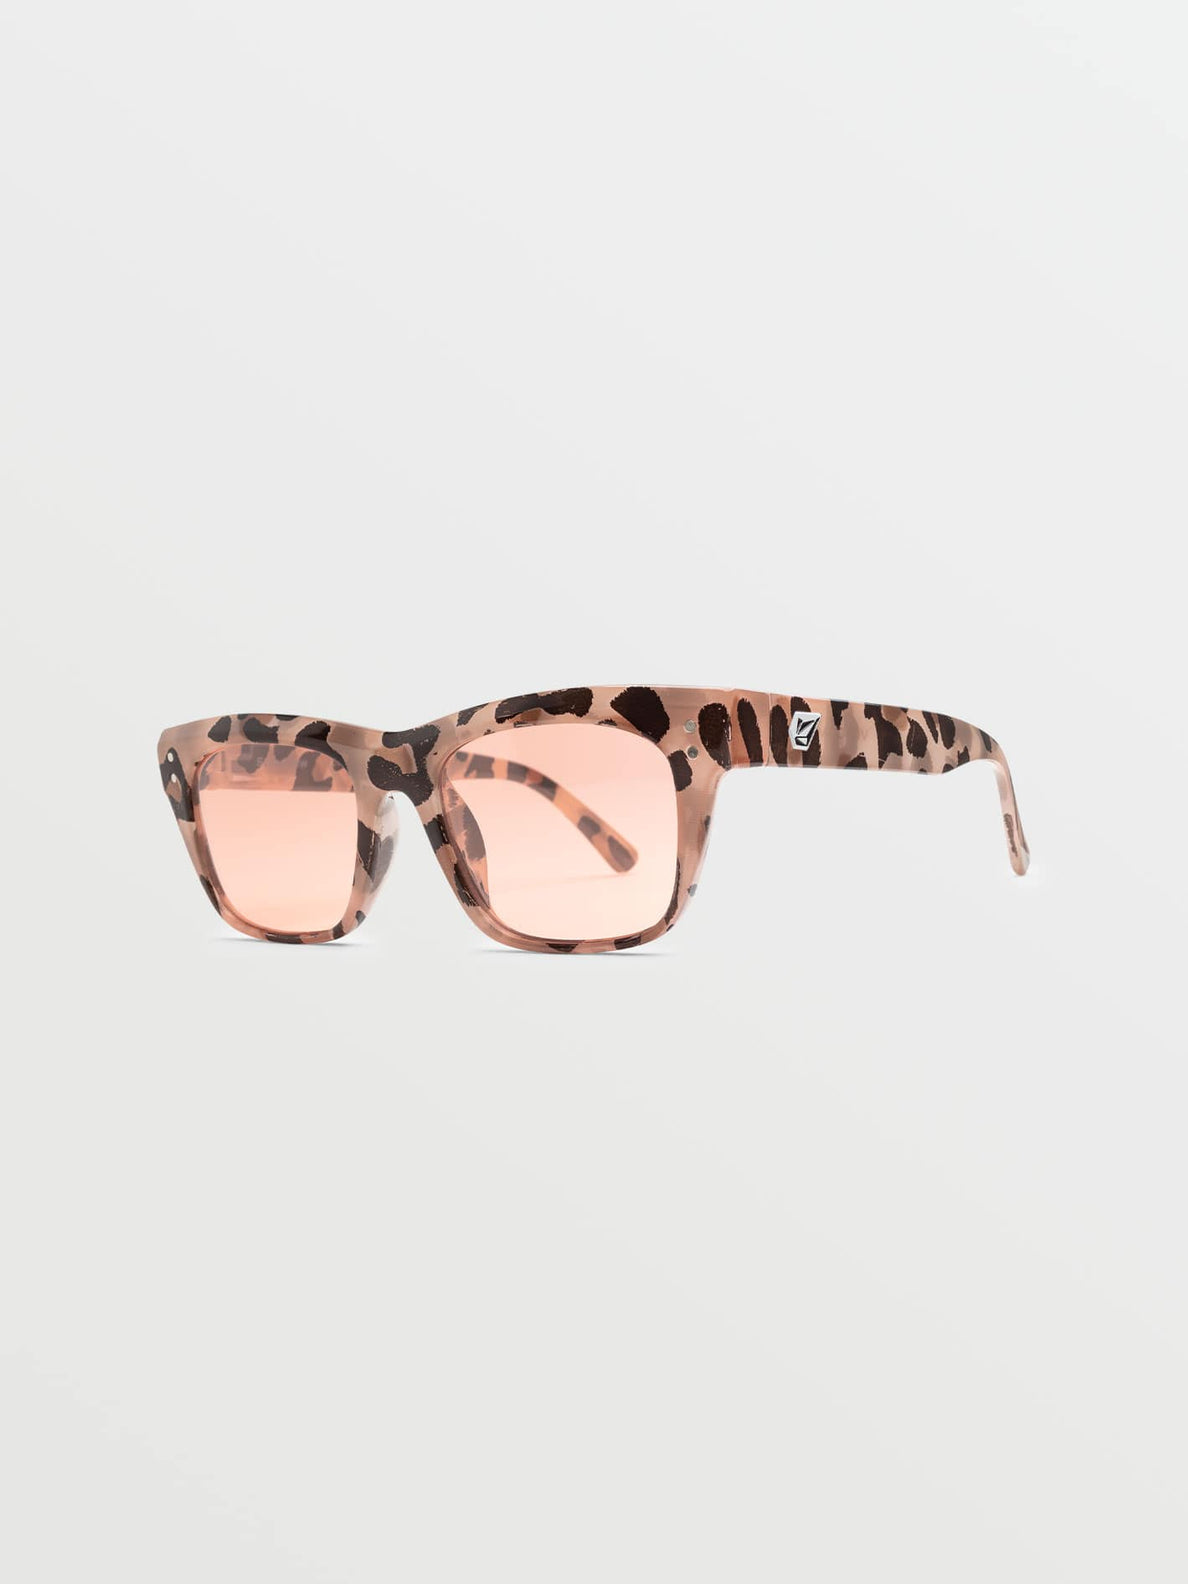 STONEVIEW SUNGLASSES - DEFF LEOPARD/ROSE